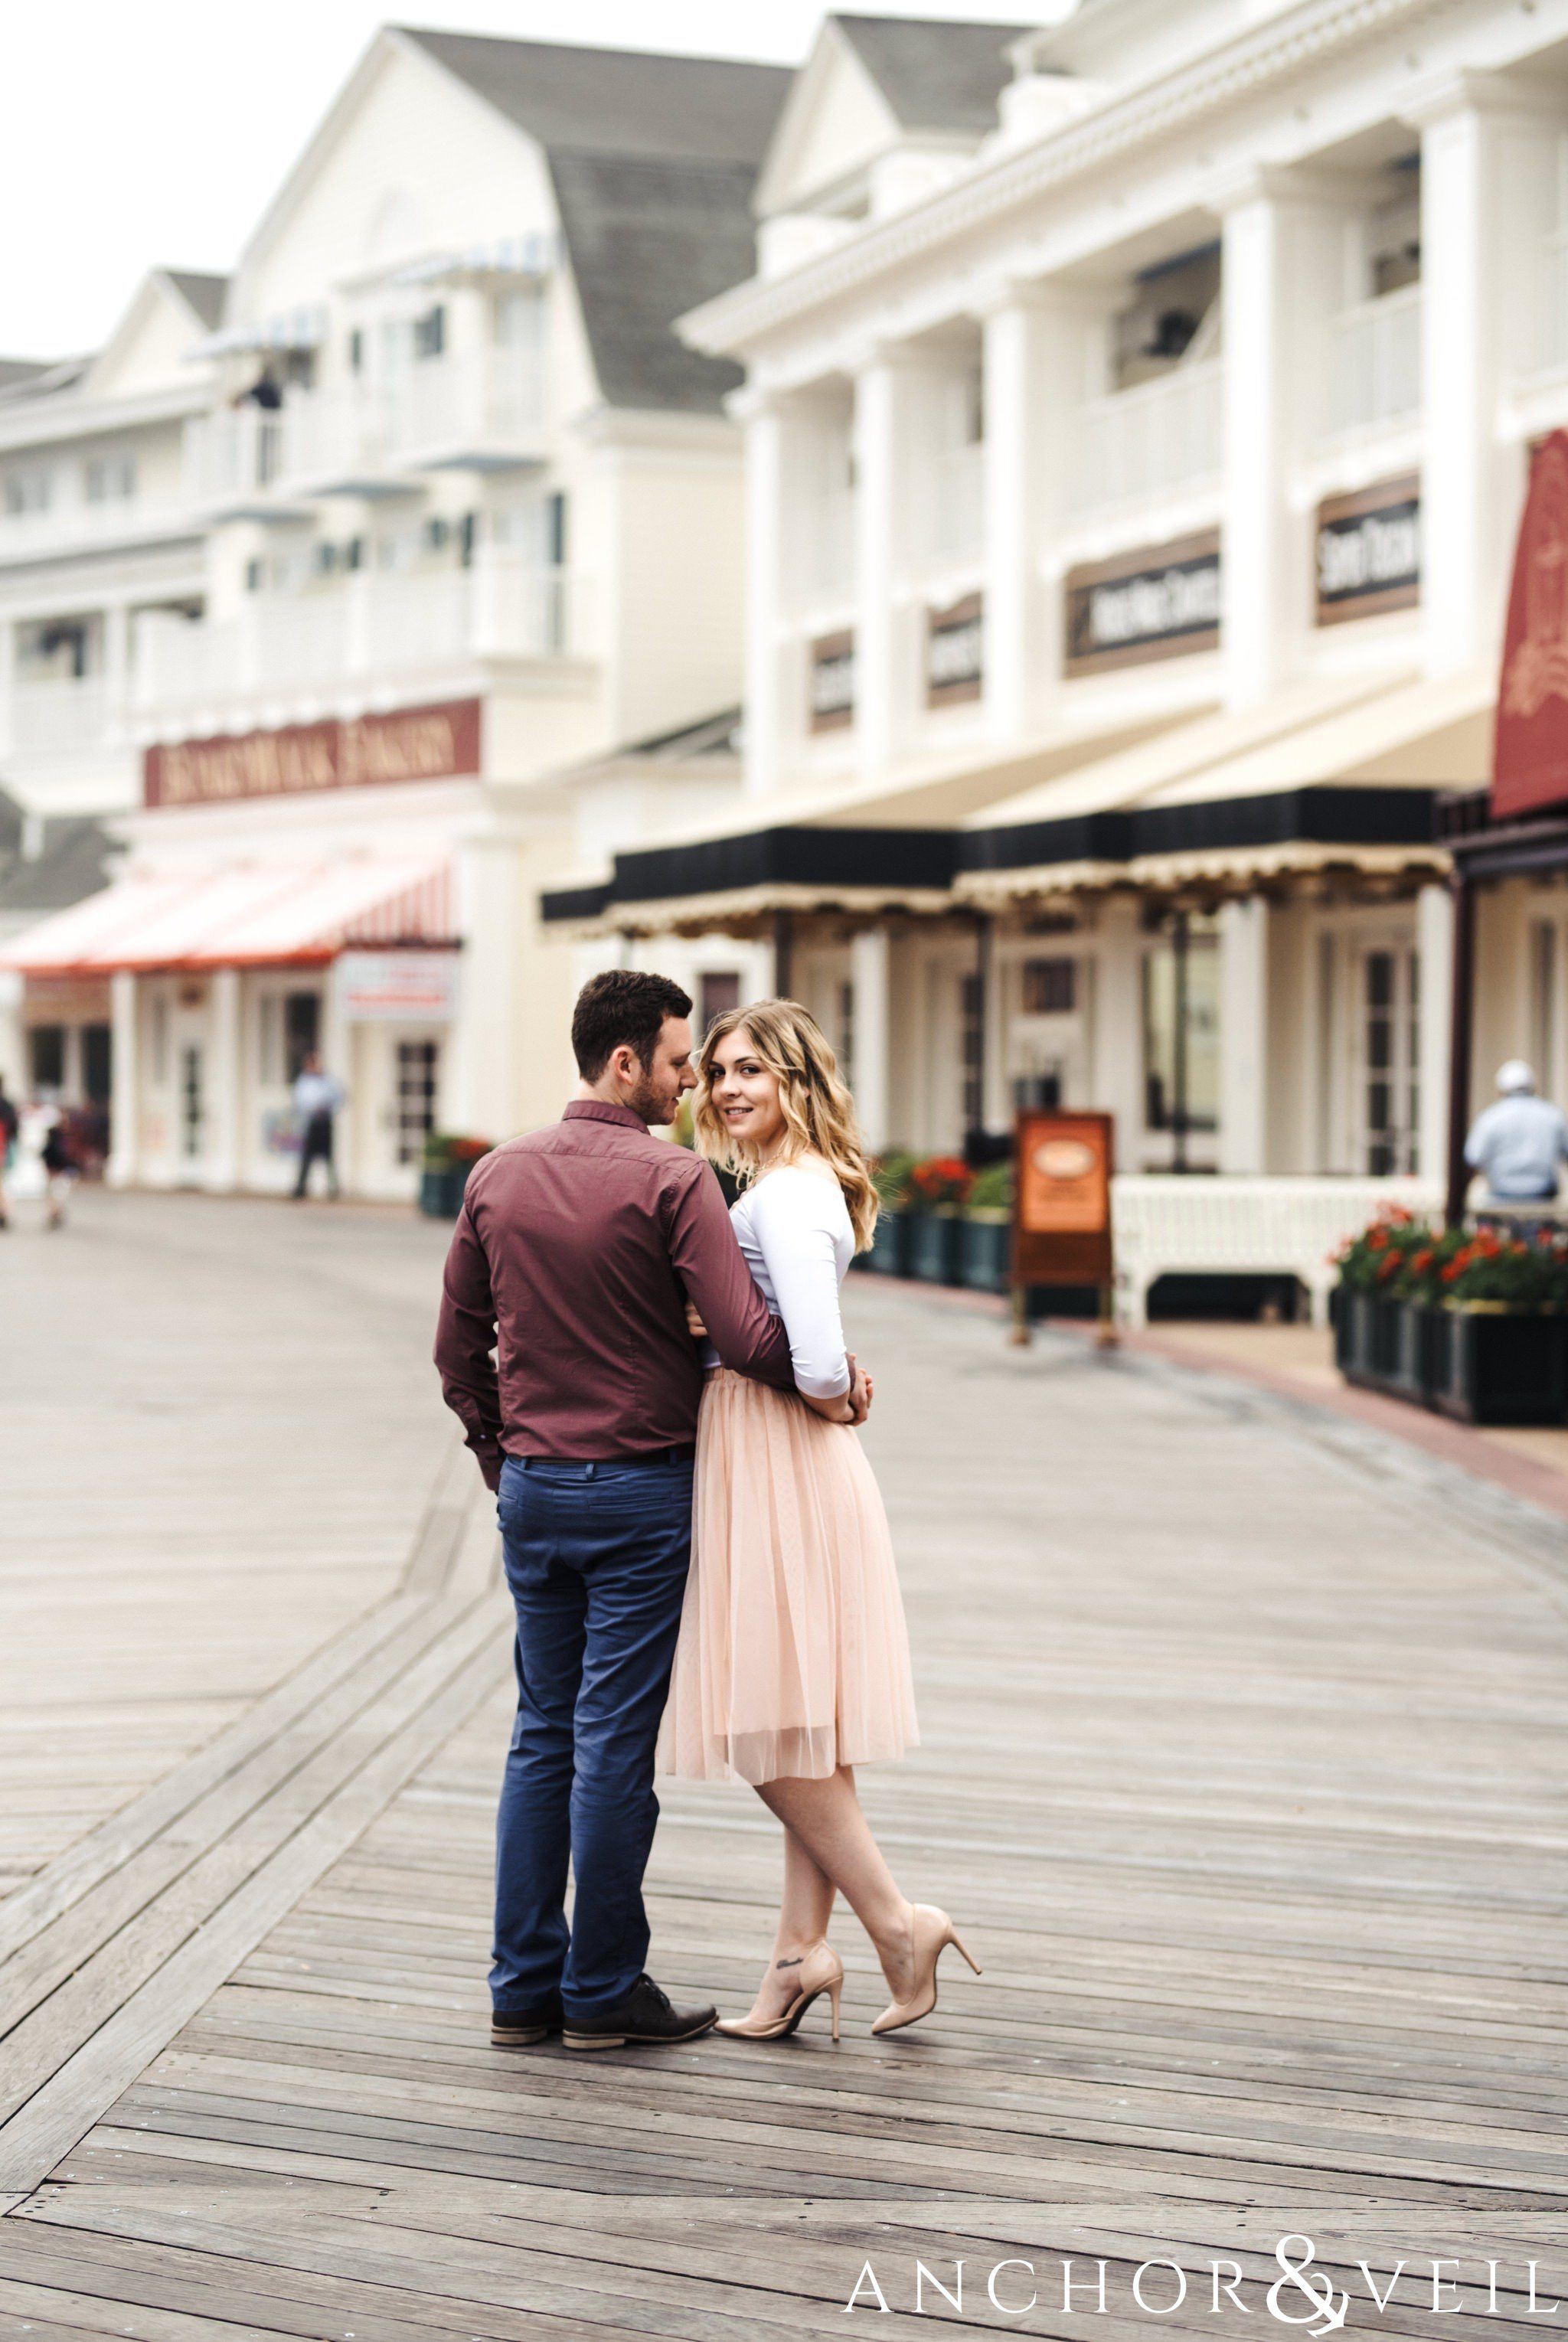 walking on the boardwalkduring their Disney world engagement session at the Boardwalk Hotel Inn